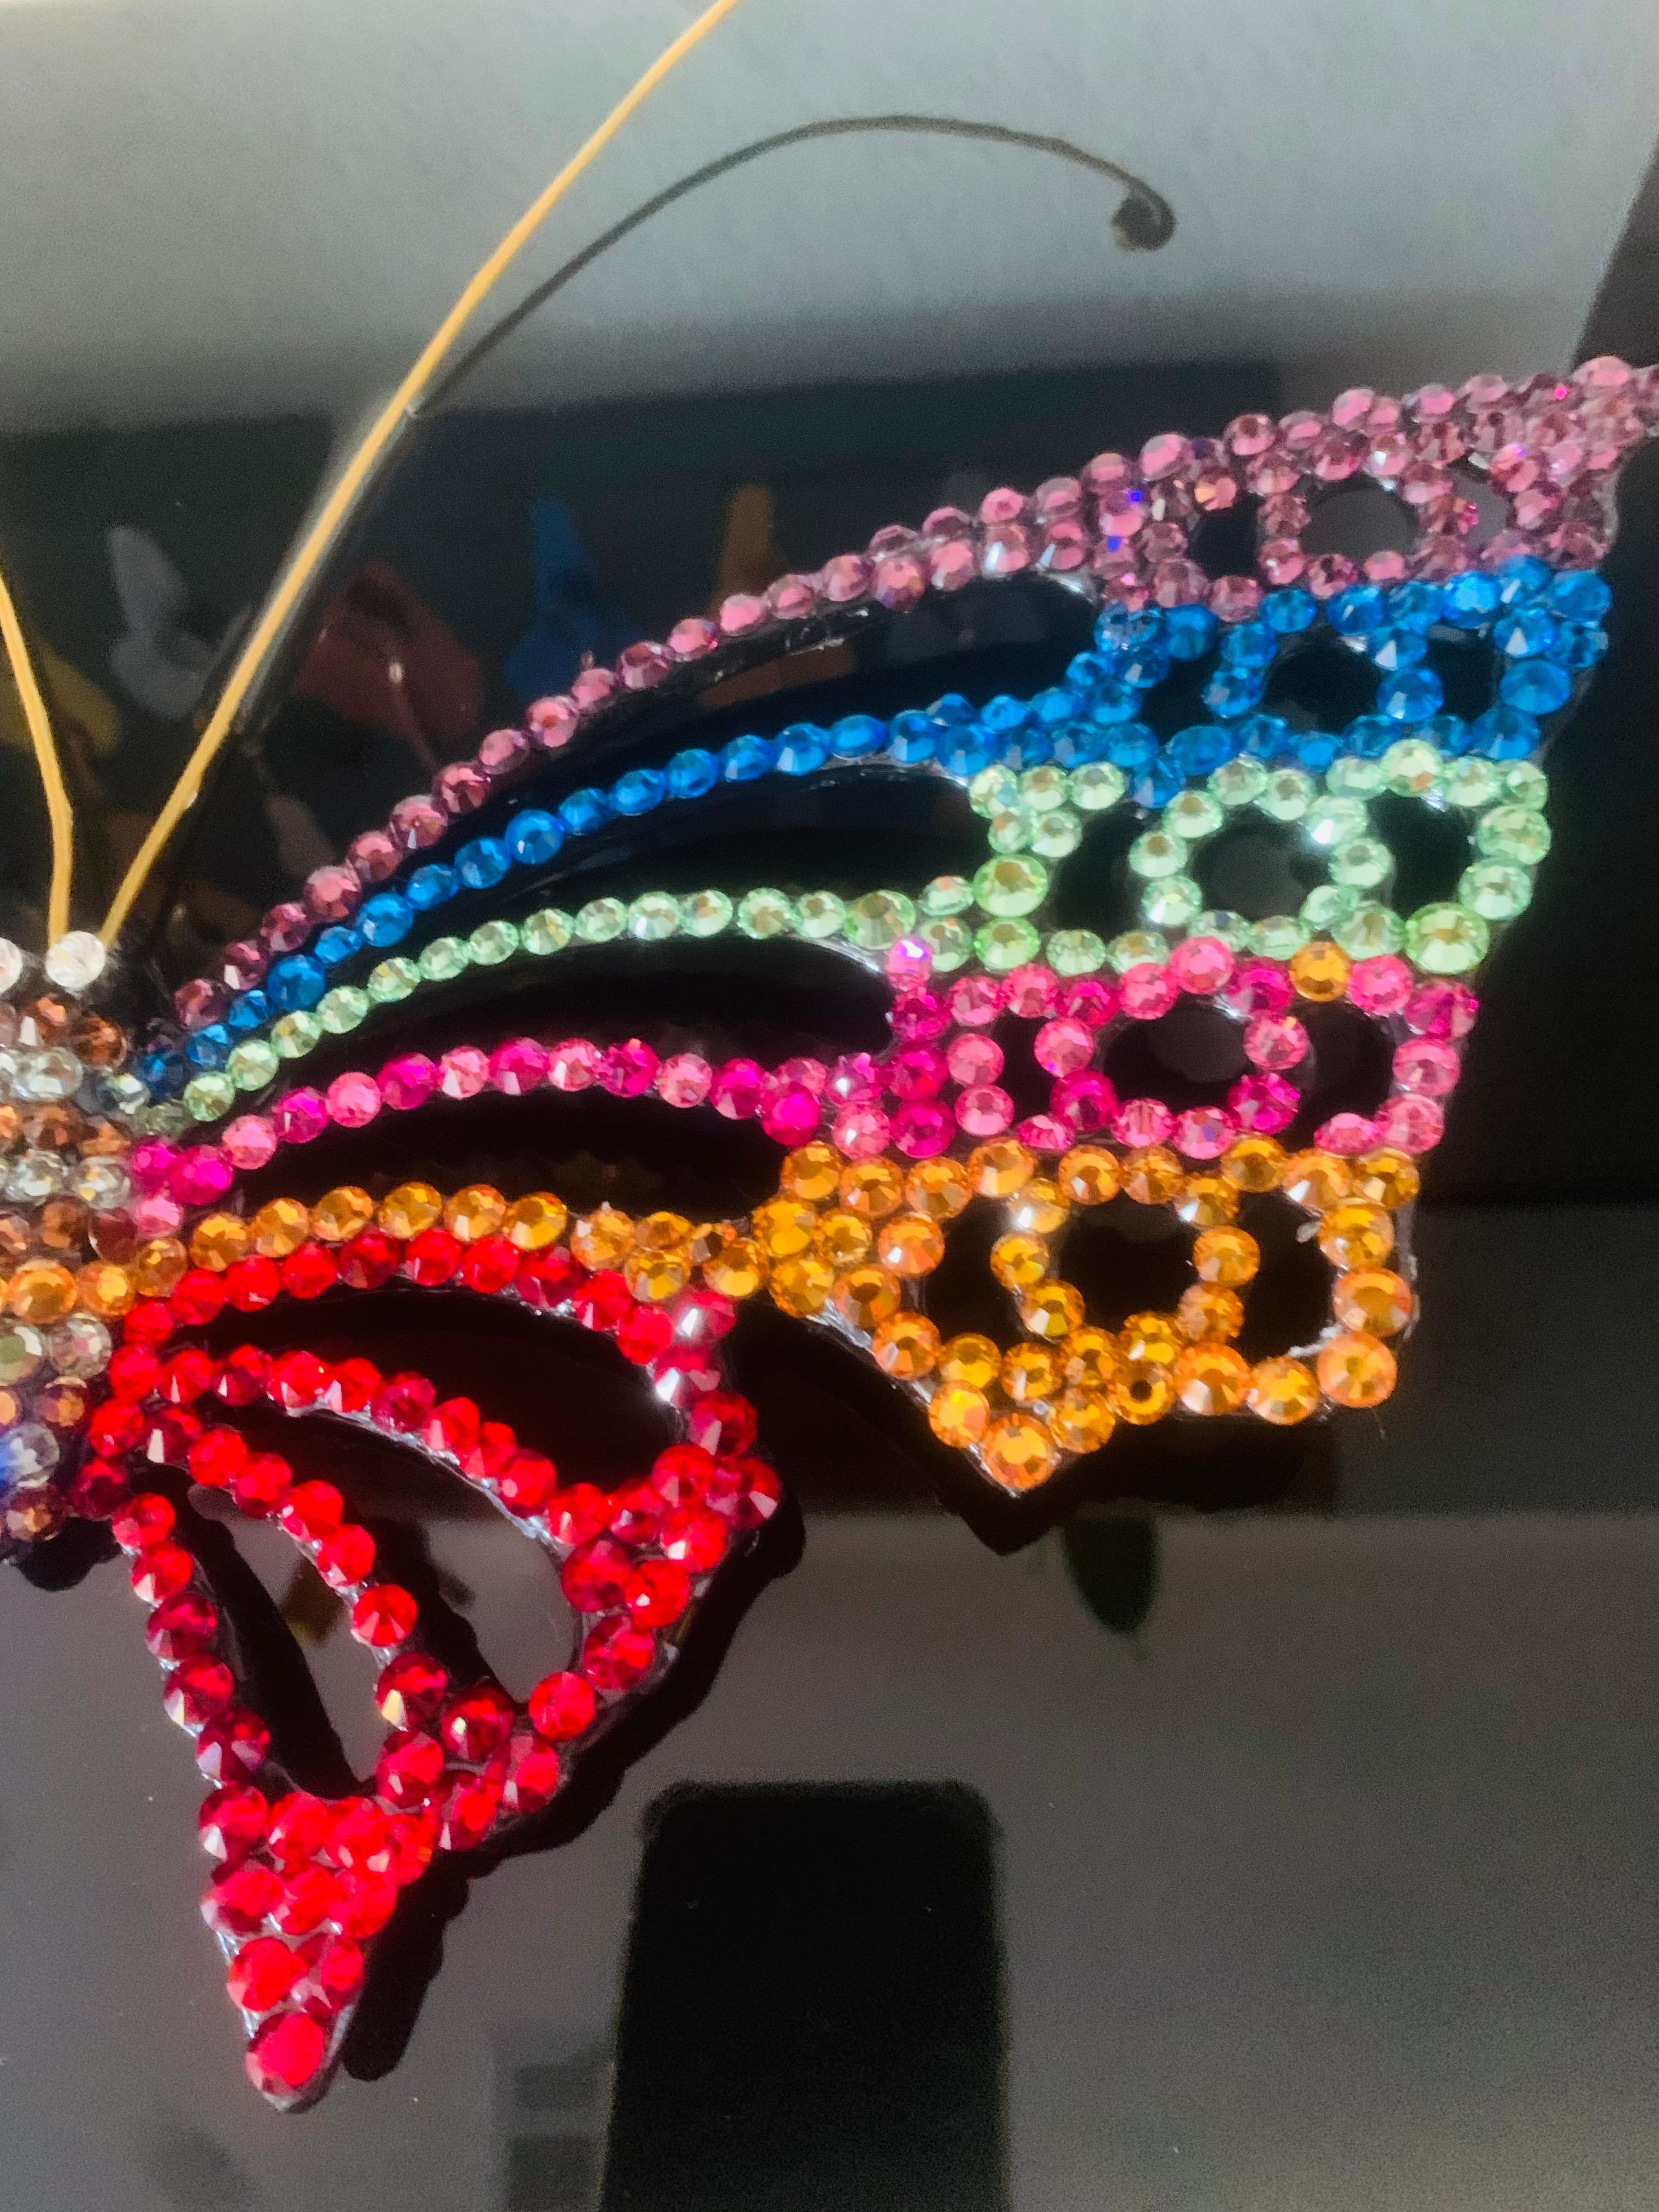 PRIDE BUTTERFLY (One of a Kind Swarovski Mixed Media Sculpture) 12